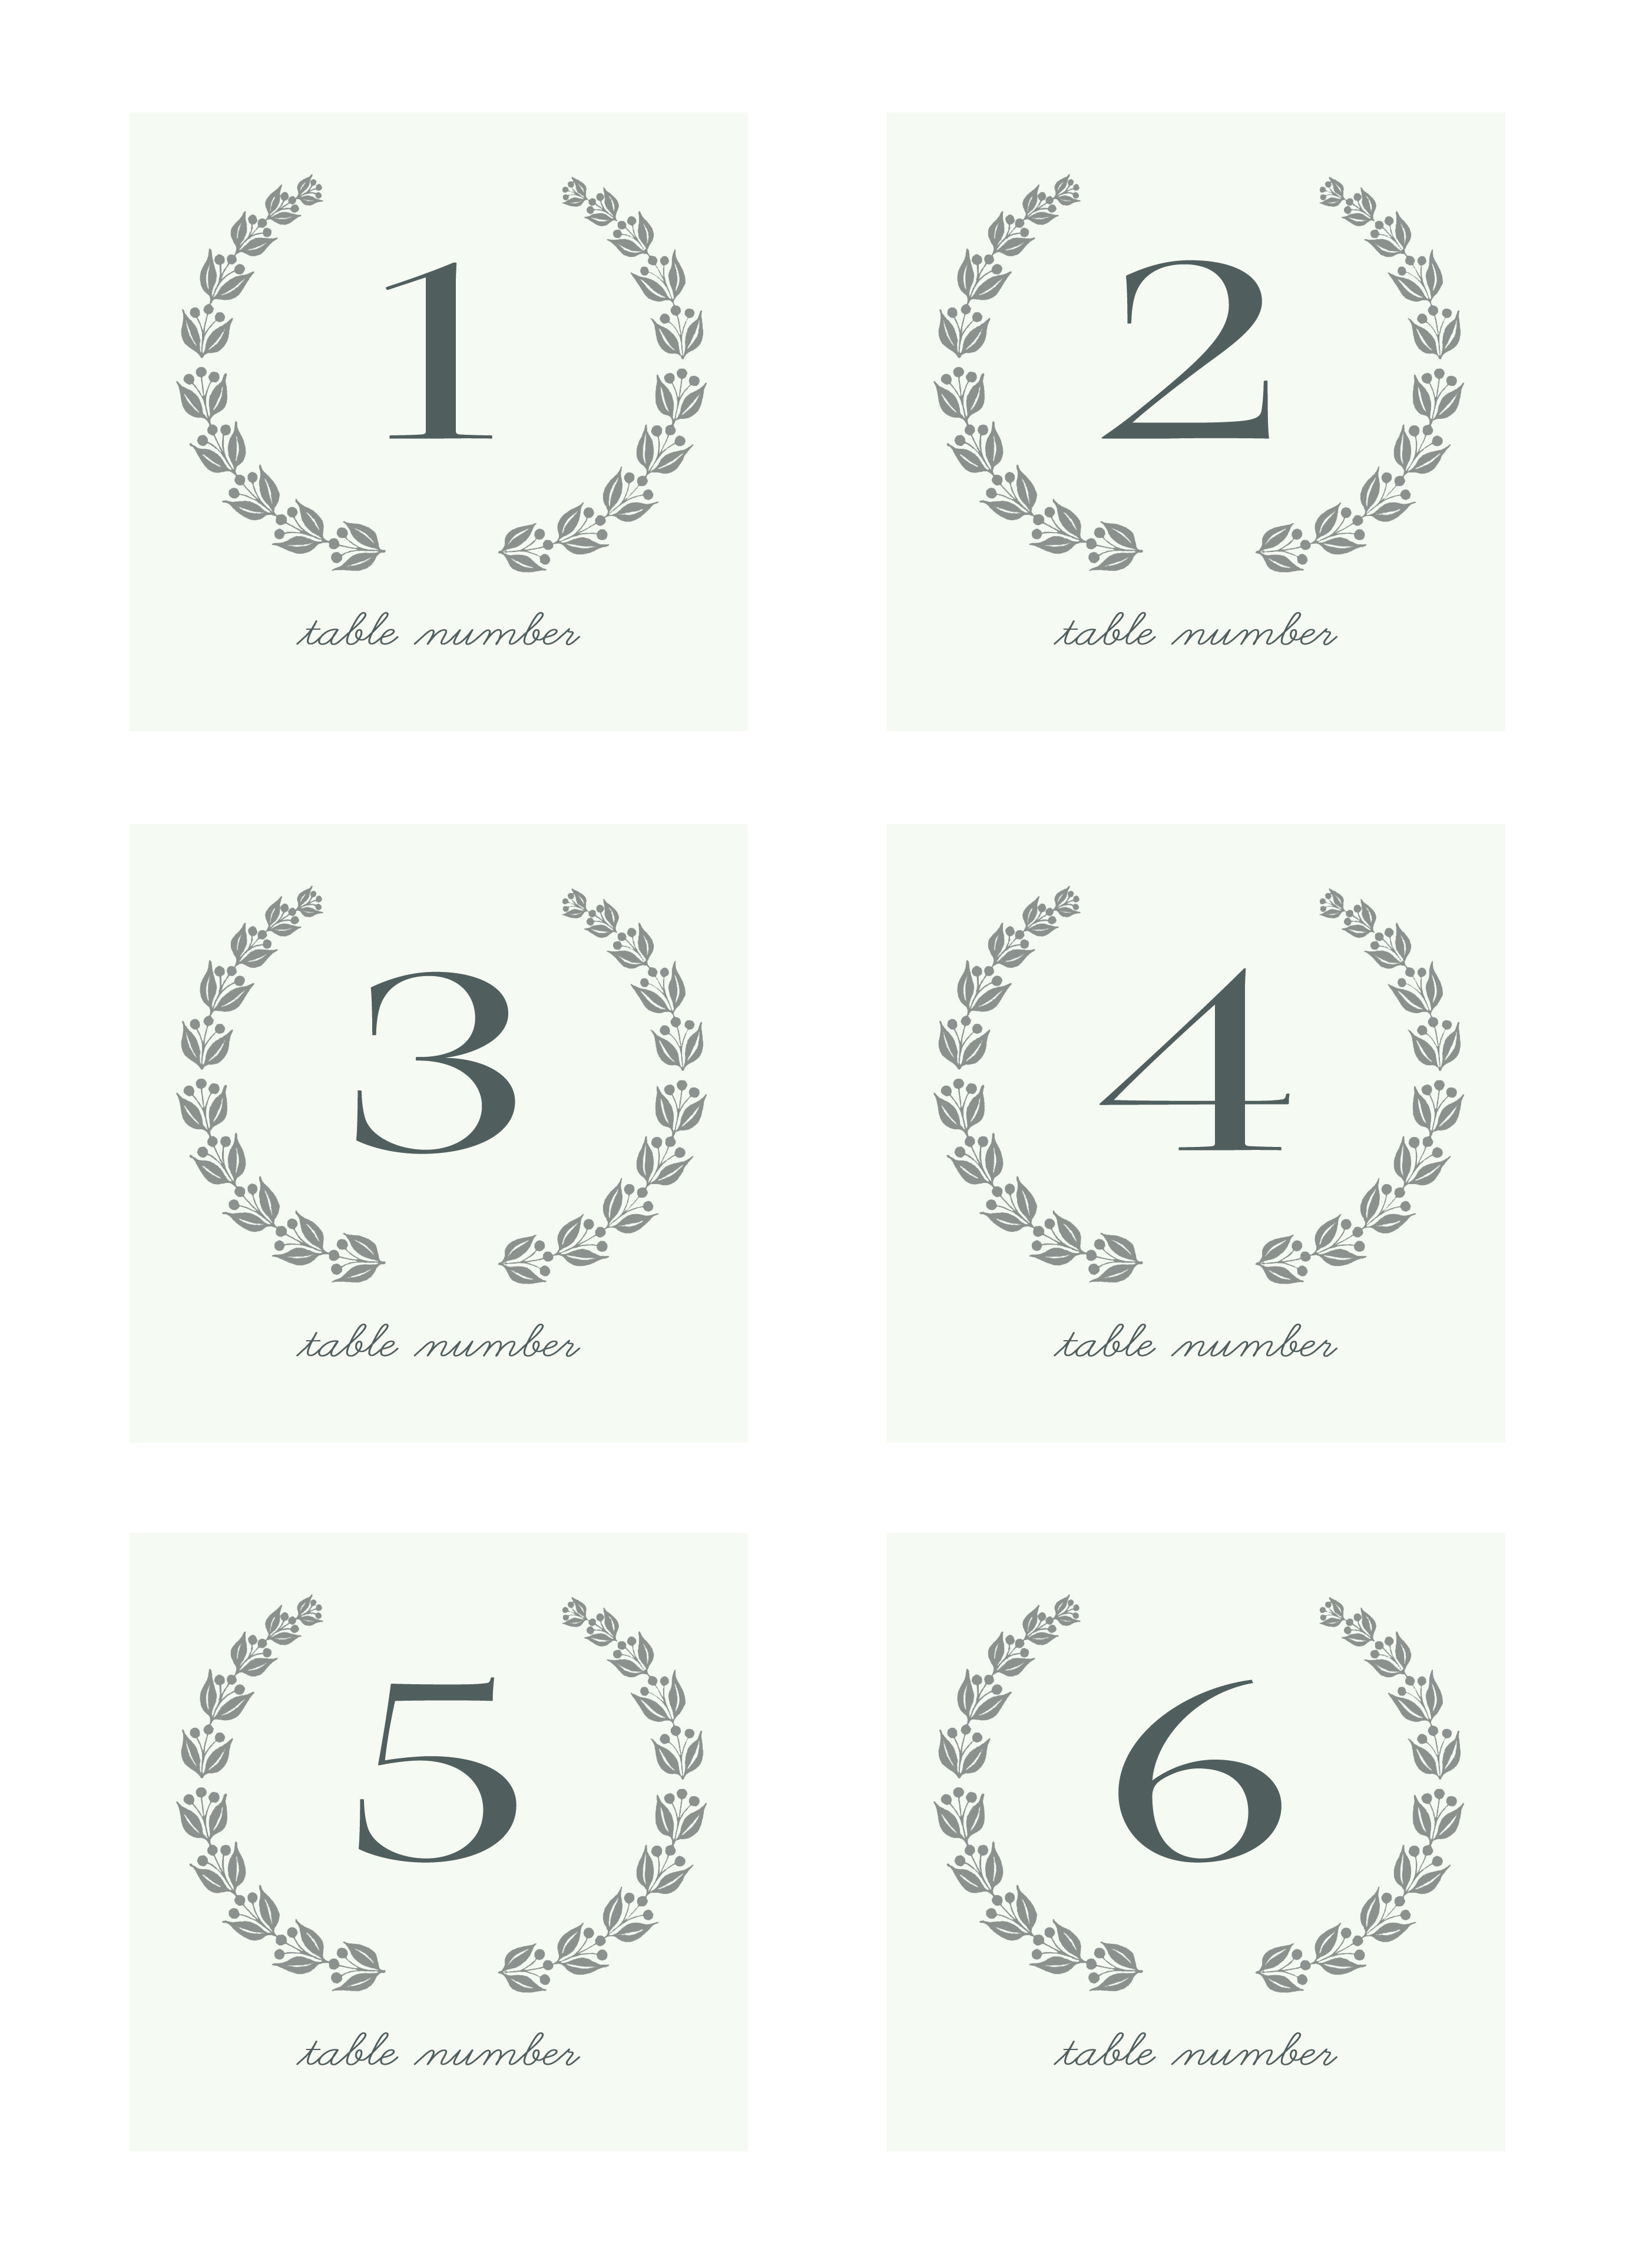 6-best-images-of-printable-table-number-templates-free-printable-table-numbers-template